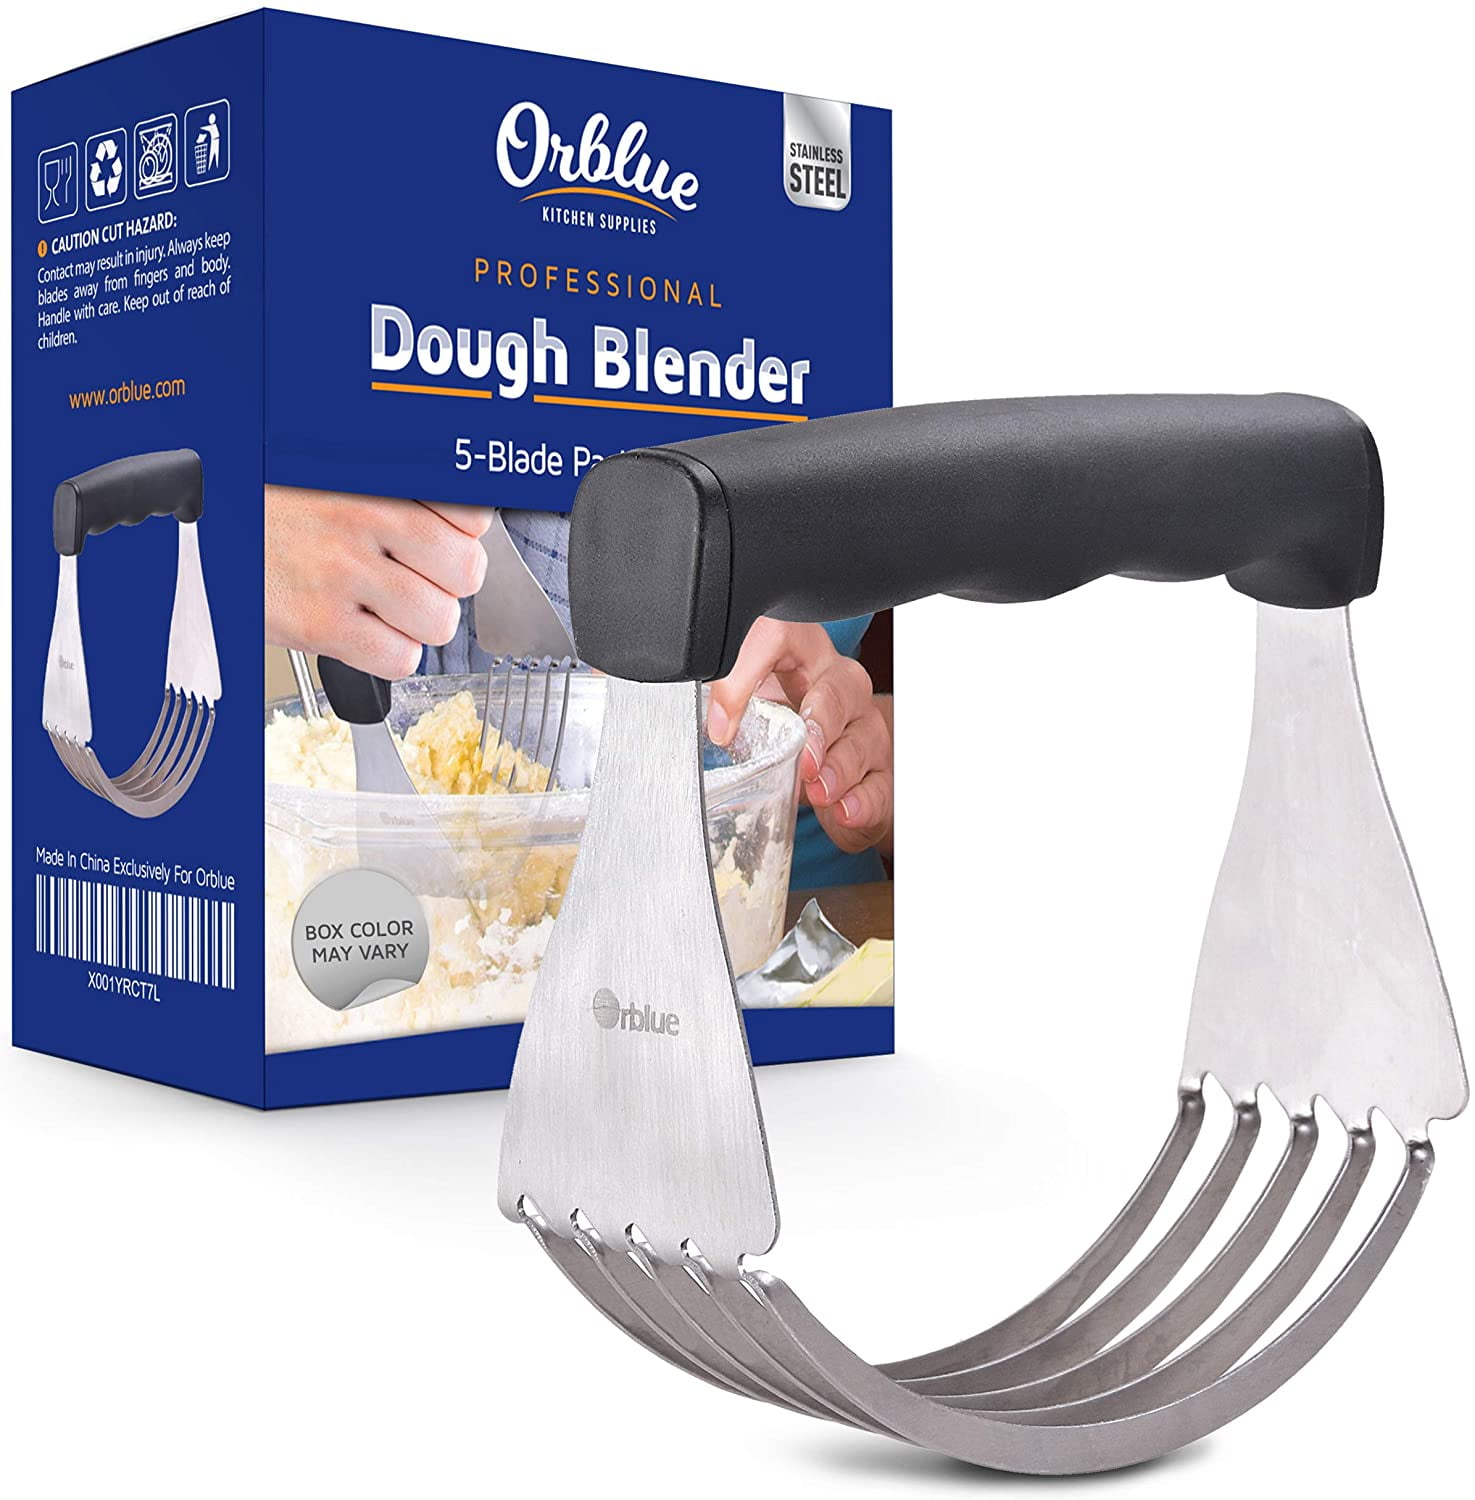 Stainless Steel Pie Crust Making Tool Ergonomic Handle with 5 Blades Butter and Flour Mixer for Baking & Cooking Dough Blender Pastry Cutter 